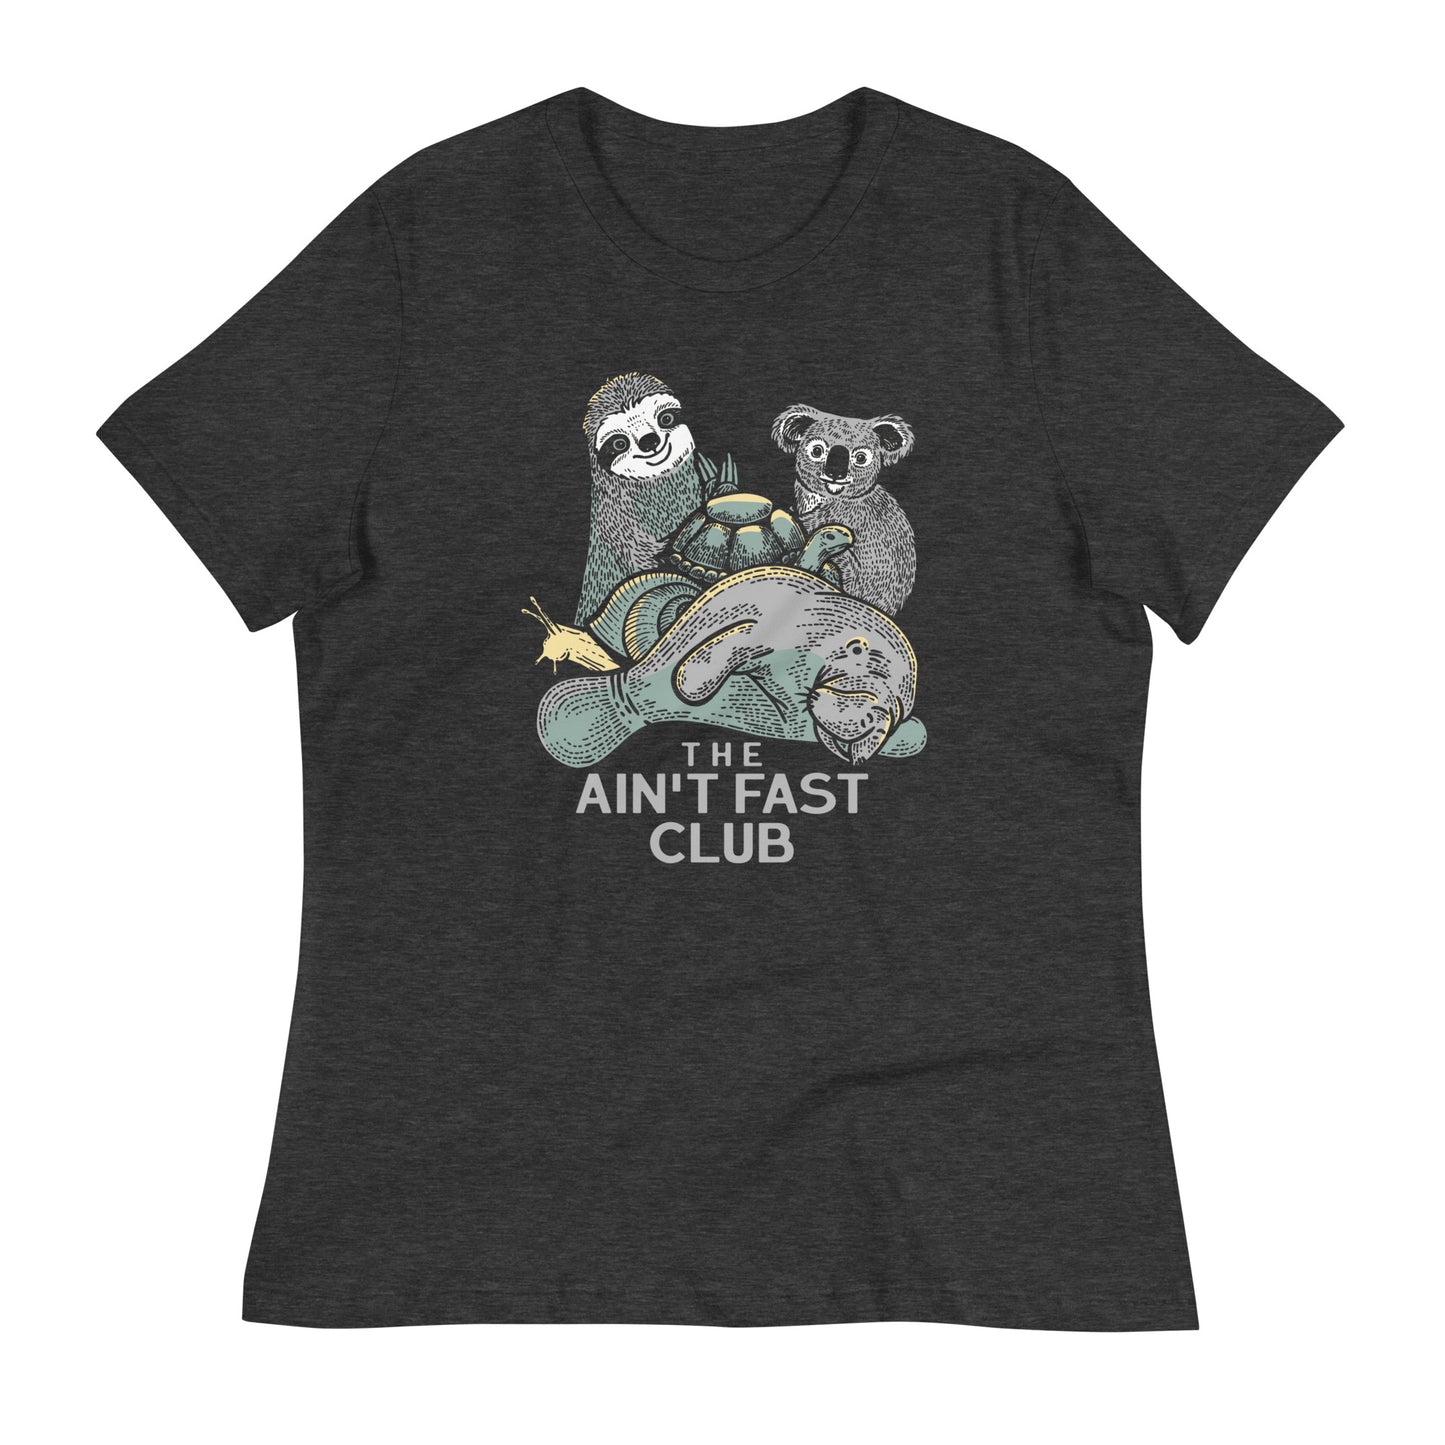 The Ain't Fast Club Women's Signature Tee